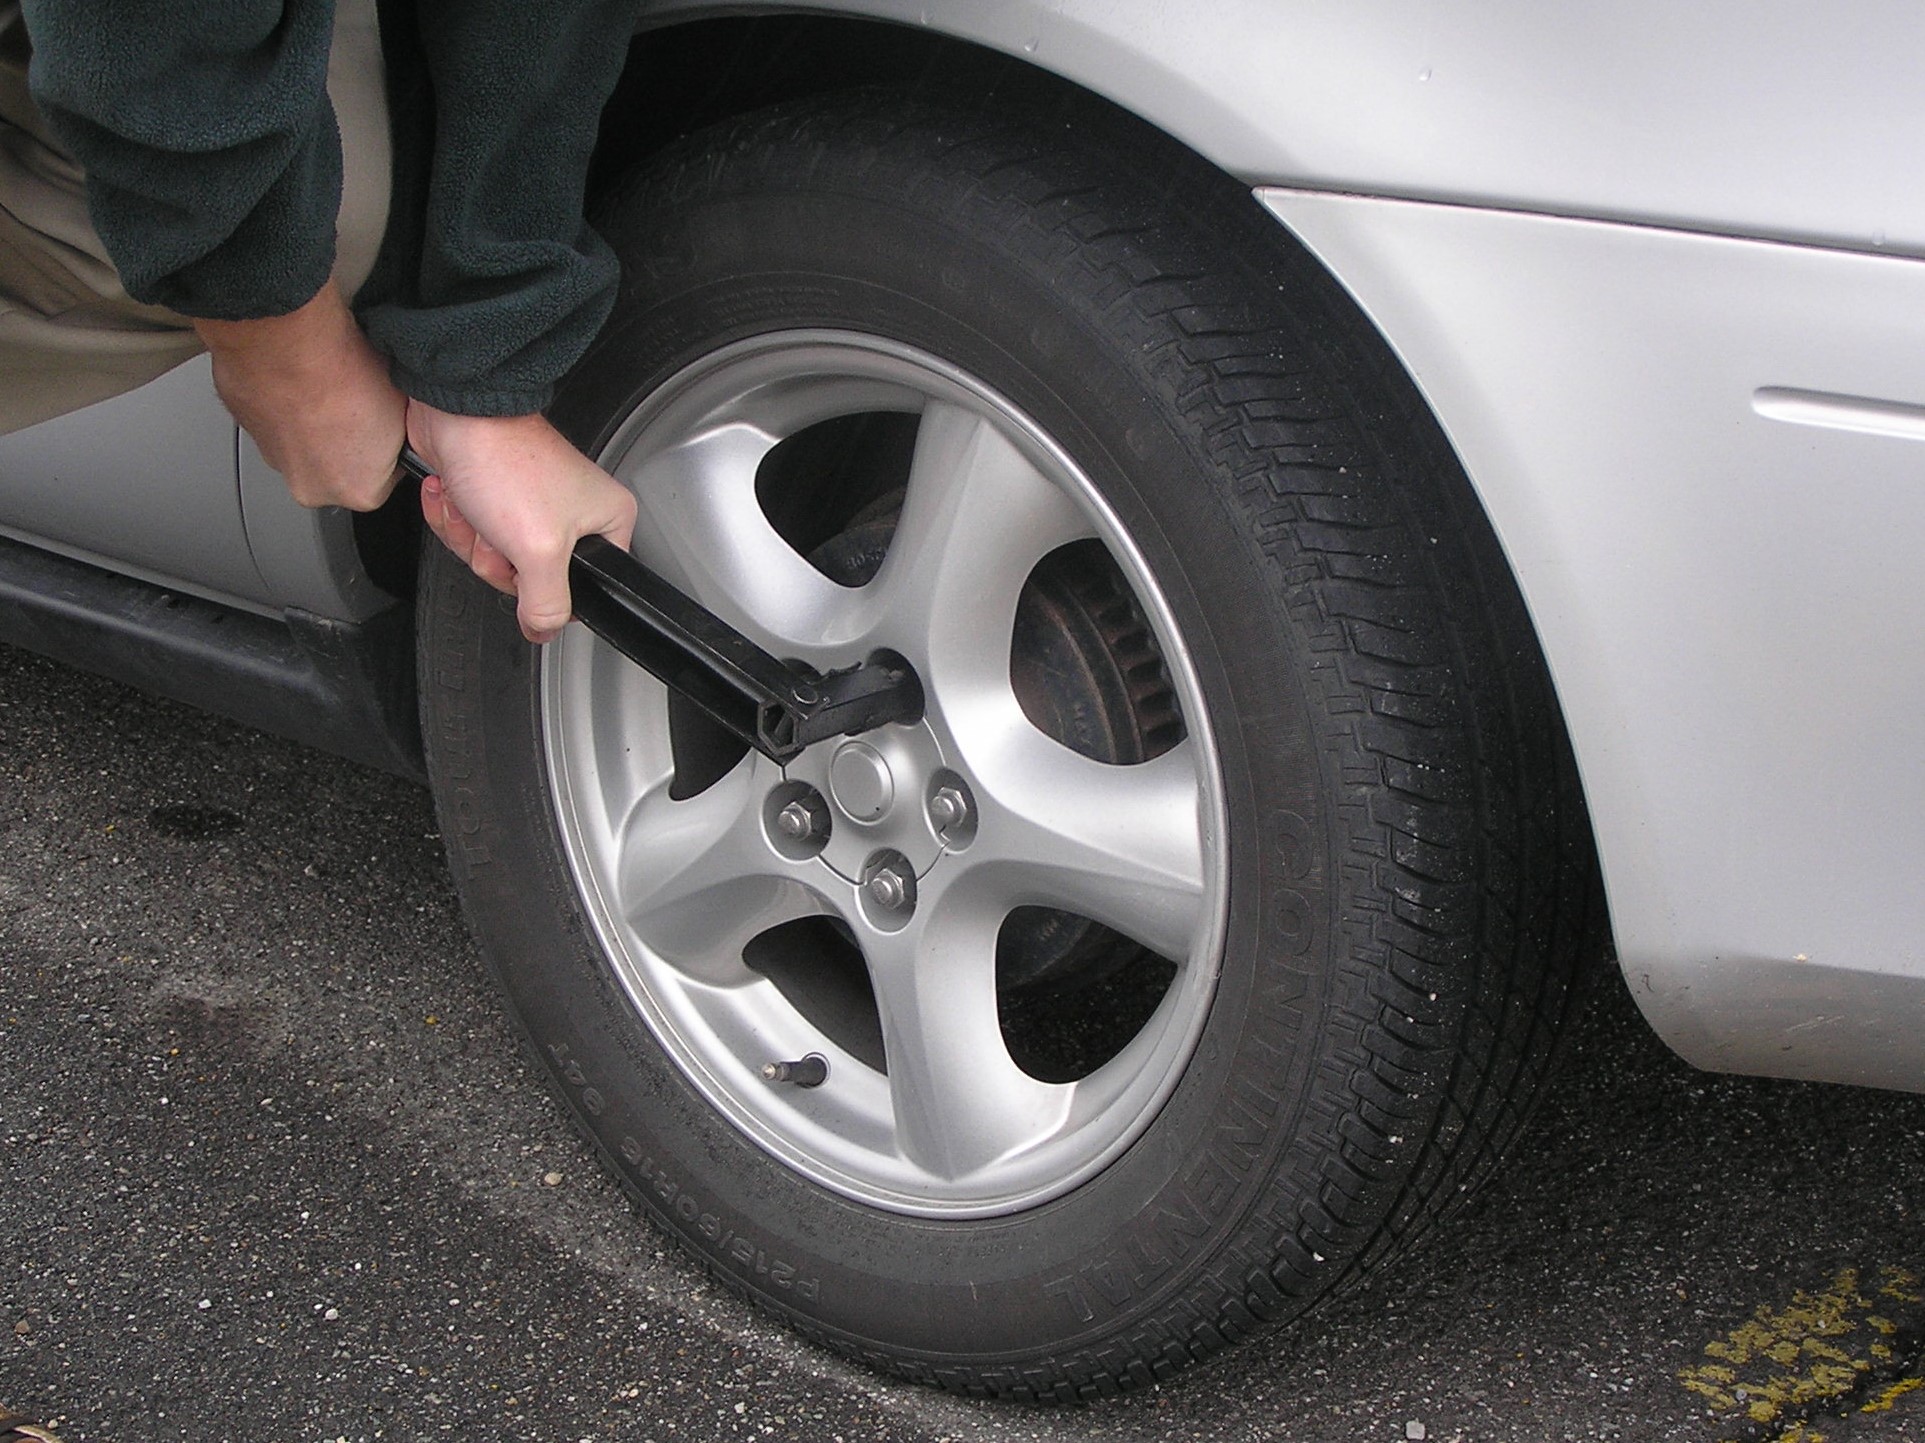 We help with all types of roadside assistance, especially tires!